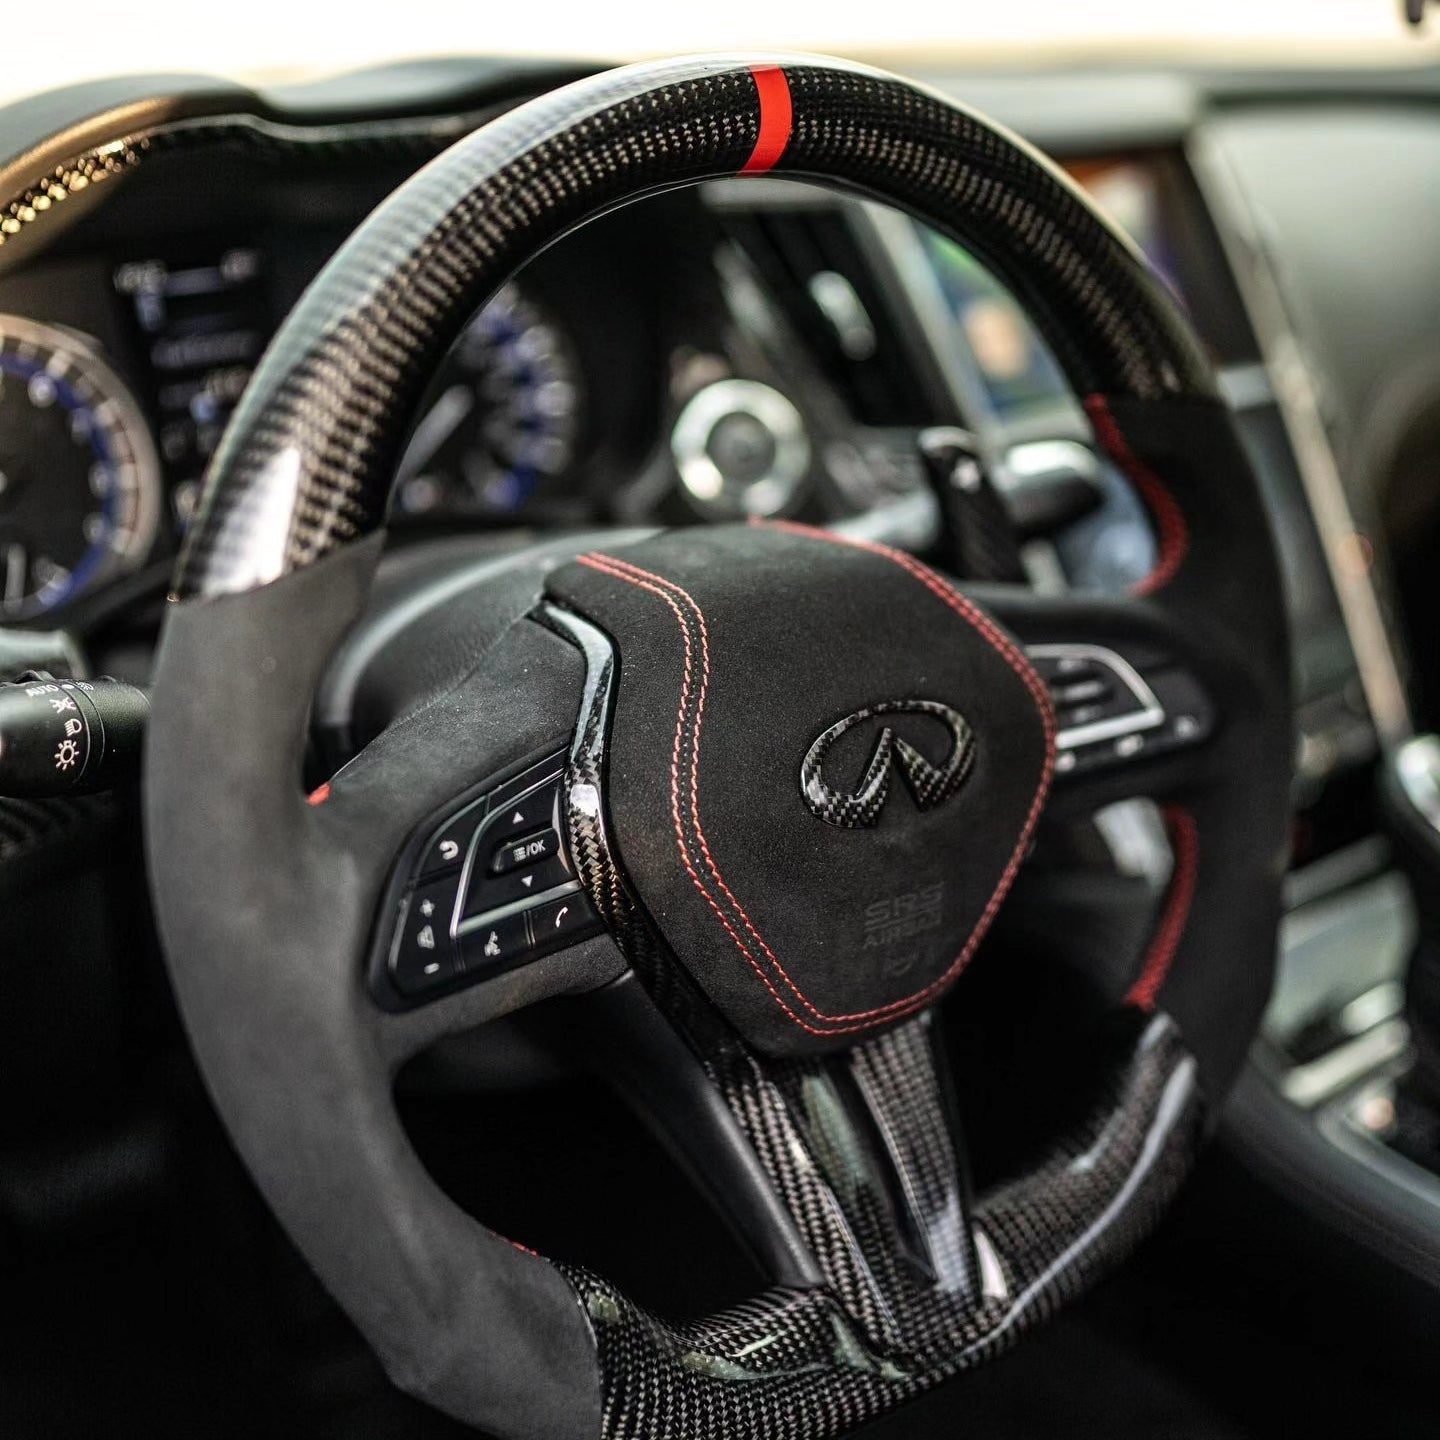 Jalisco's carbon fiber steering wheel for Infiniti Q50/Q60 with red stripe and silk grip handles